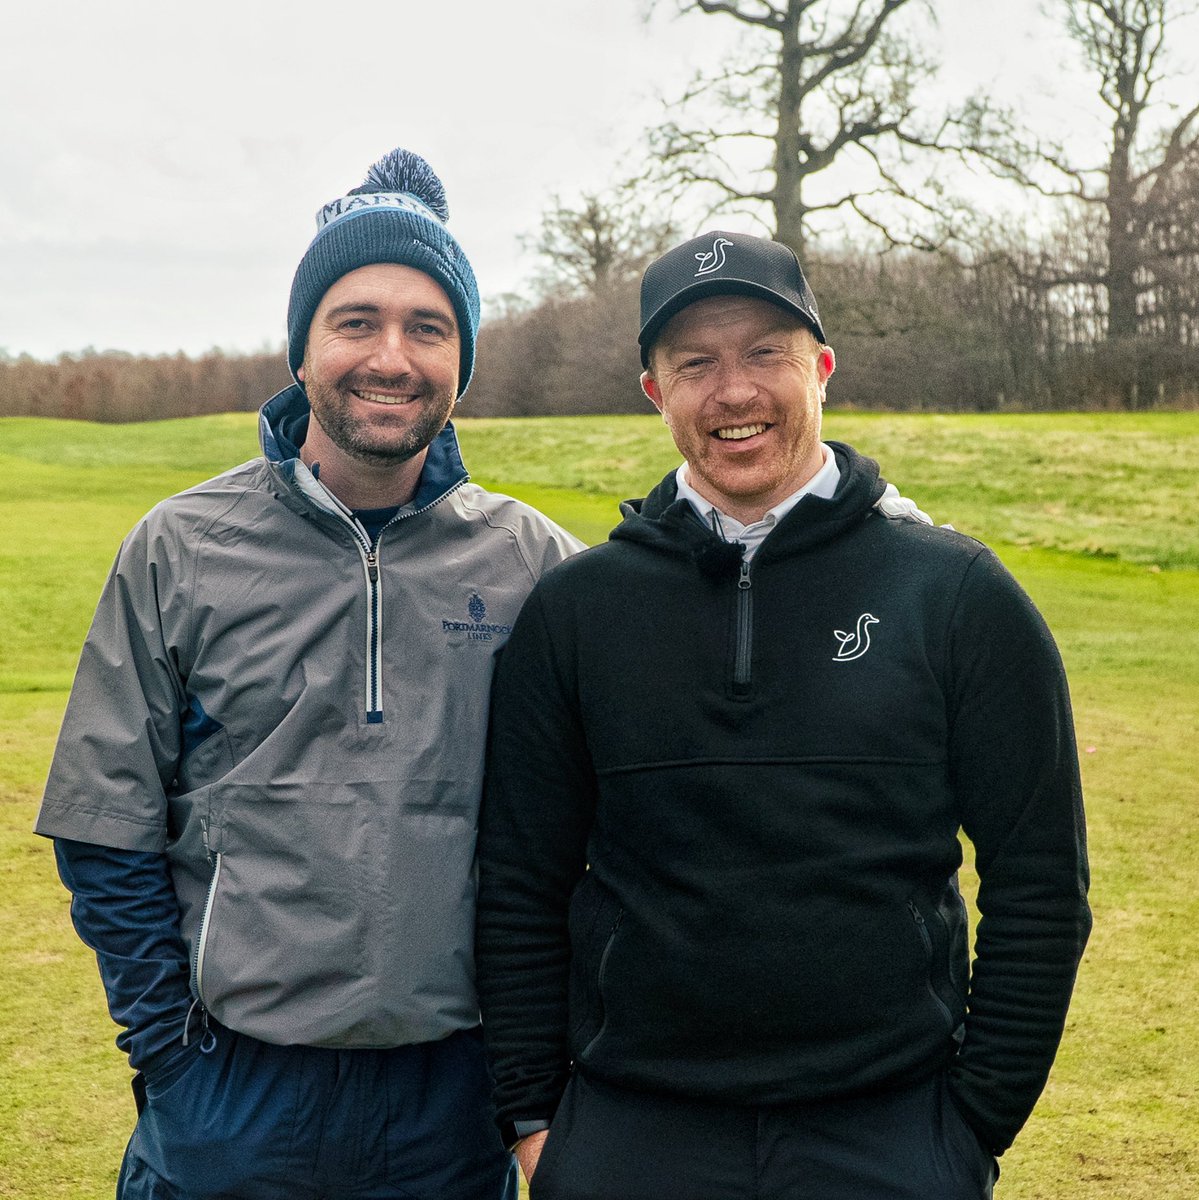 Battle Golf is live! Dave took on @brenwaltz in a 9 hole match with a twist, that twist is if you lose a hole , you lose a club from your bag! We played @CartonHouseGolf Monty Course. This episode was such a laugh to make! Who do you think wins? WATCH - youtu.be/NJqtEwktGmM